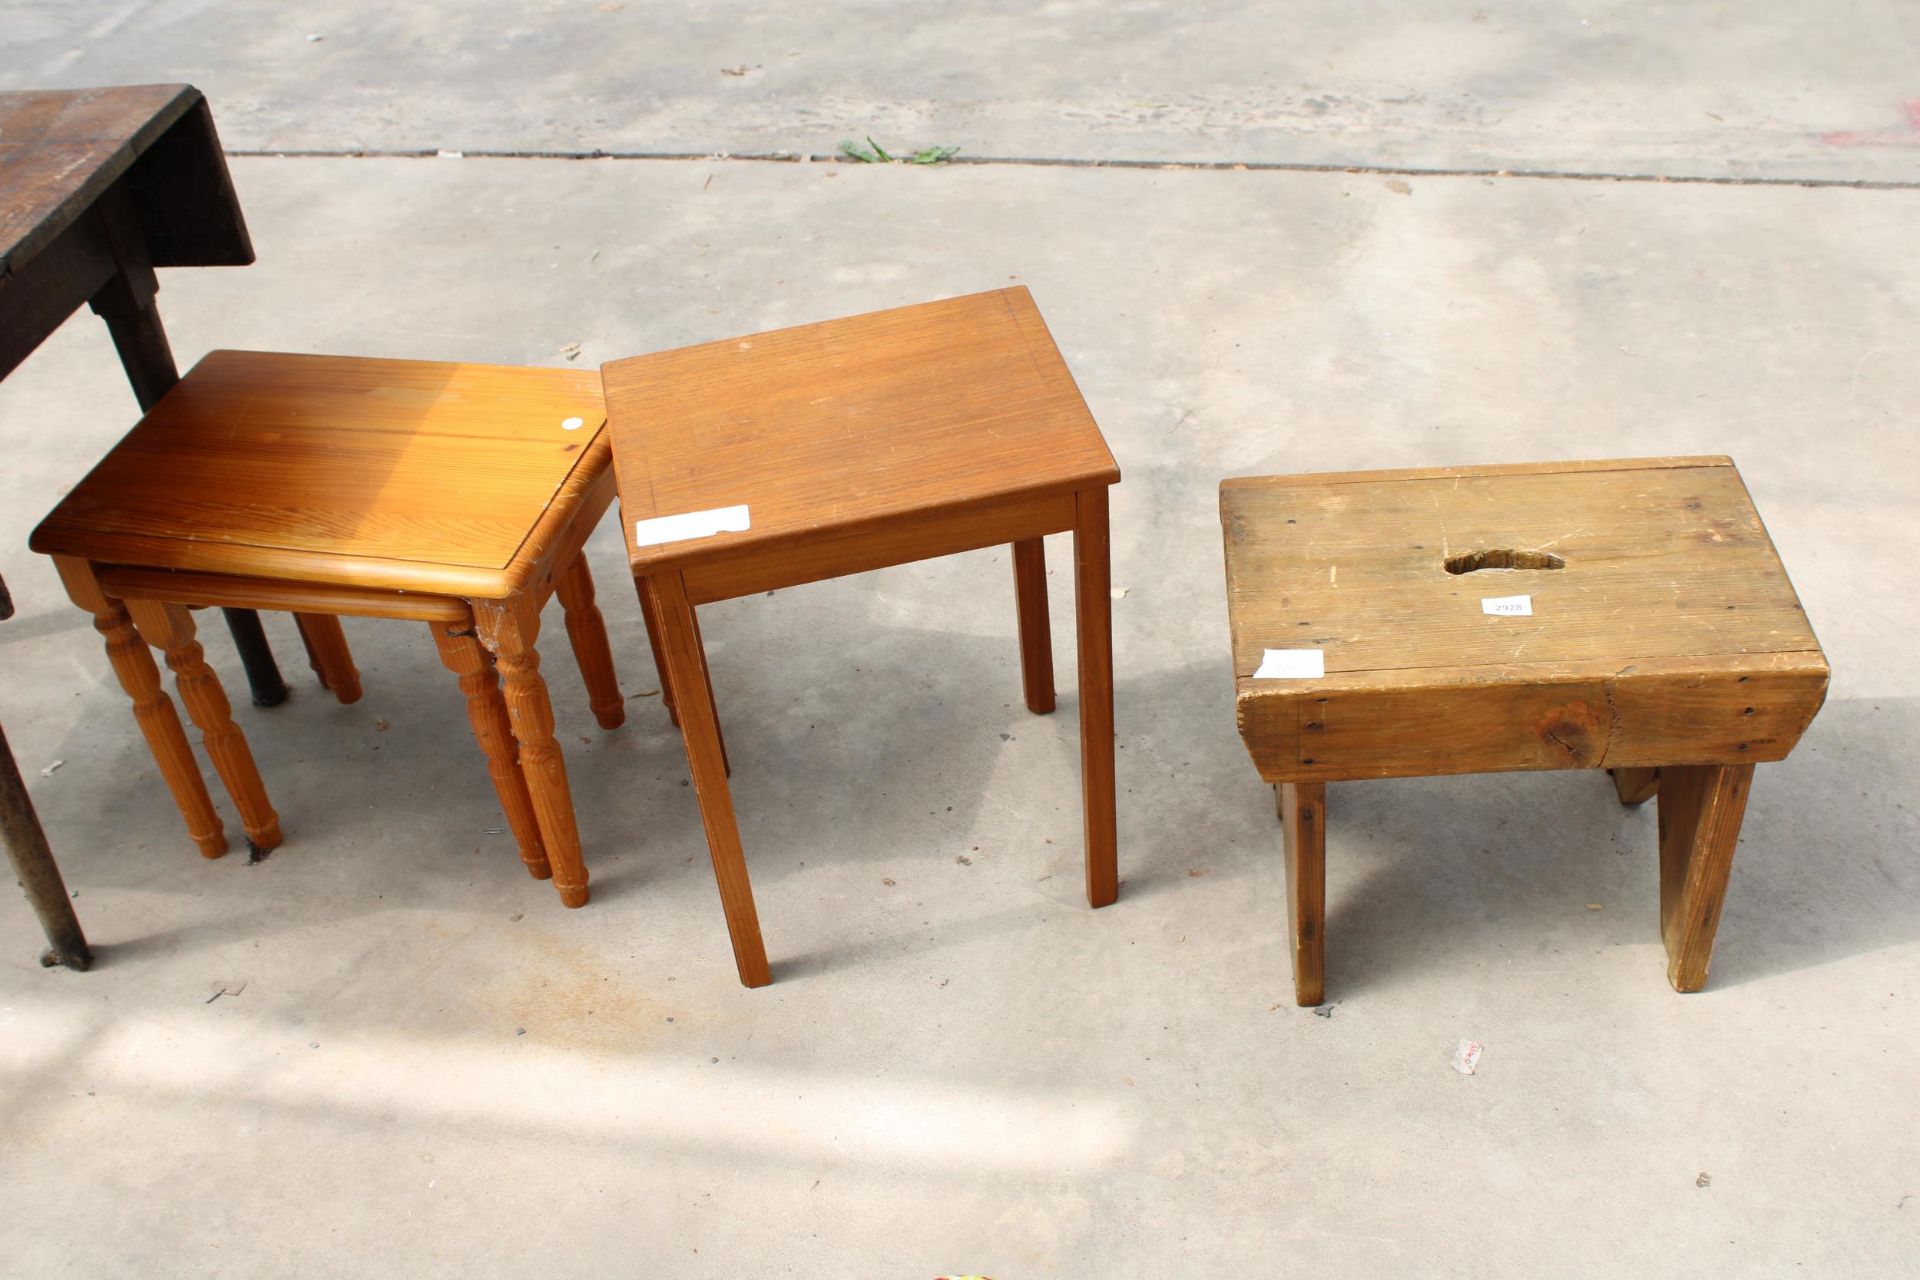 A PINE STOOL, SMALL TEAK TABLE AND A NEST OF TWO TABLES